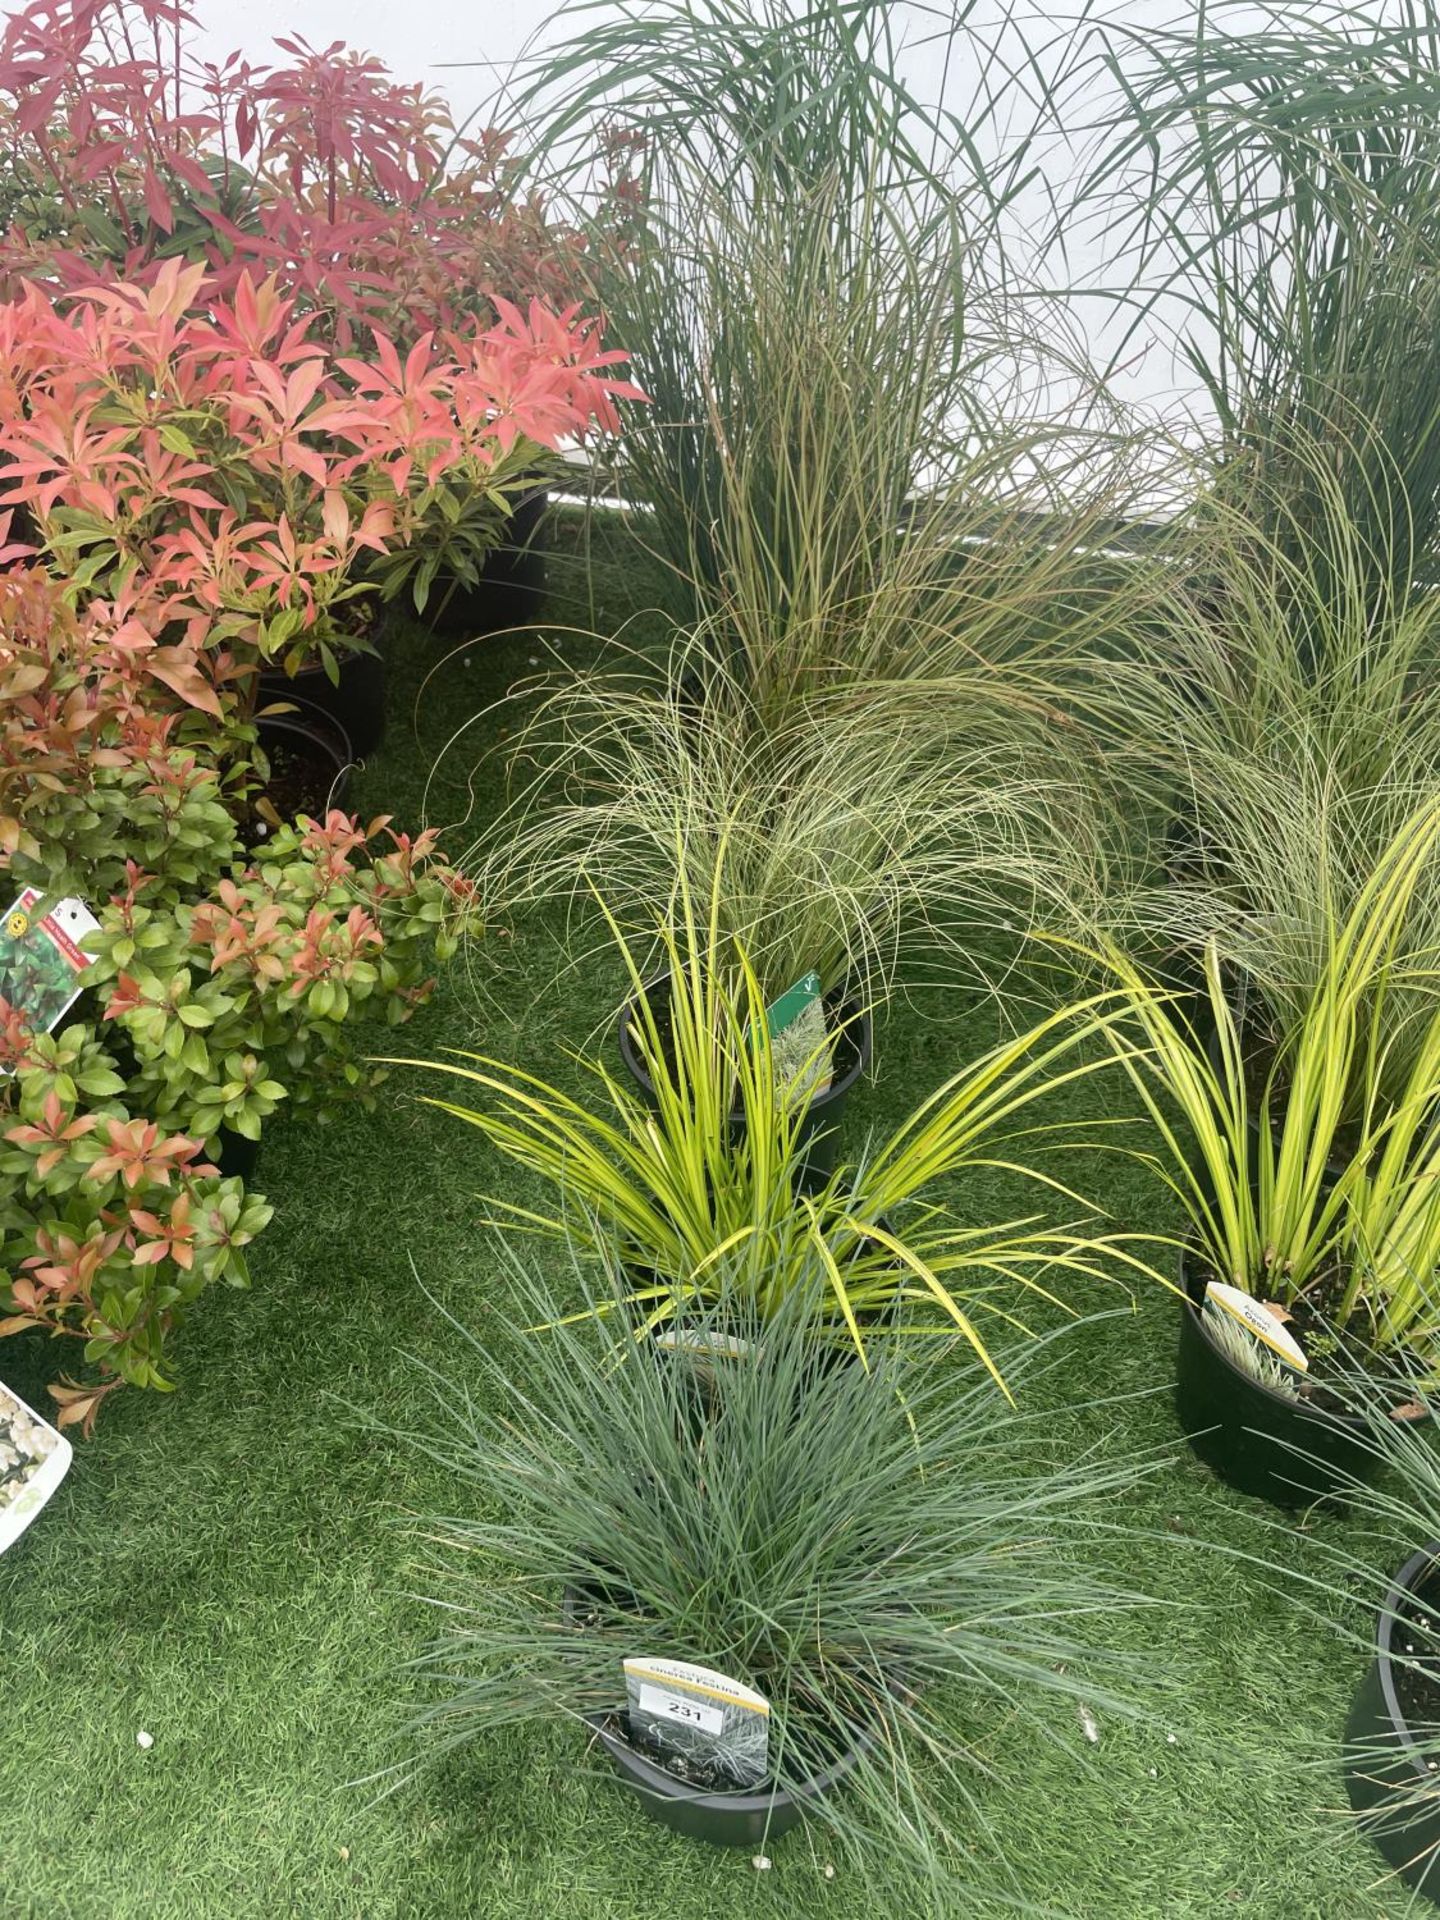 SEVEN MIXED GRASSES TO BE SOLD FOR THE SEVEN PLUS VAT